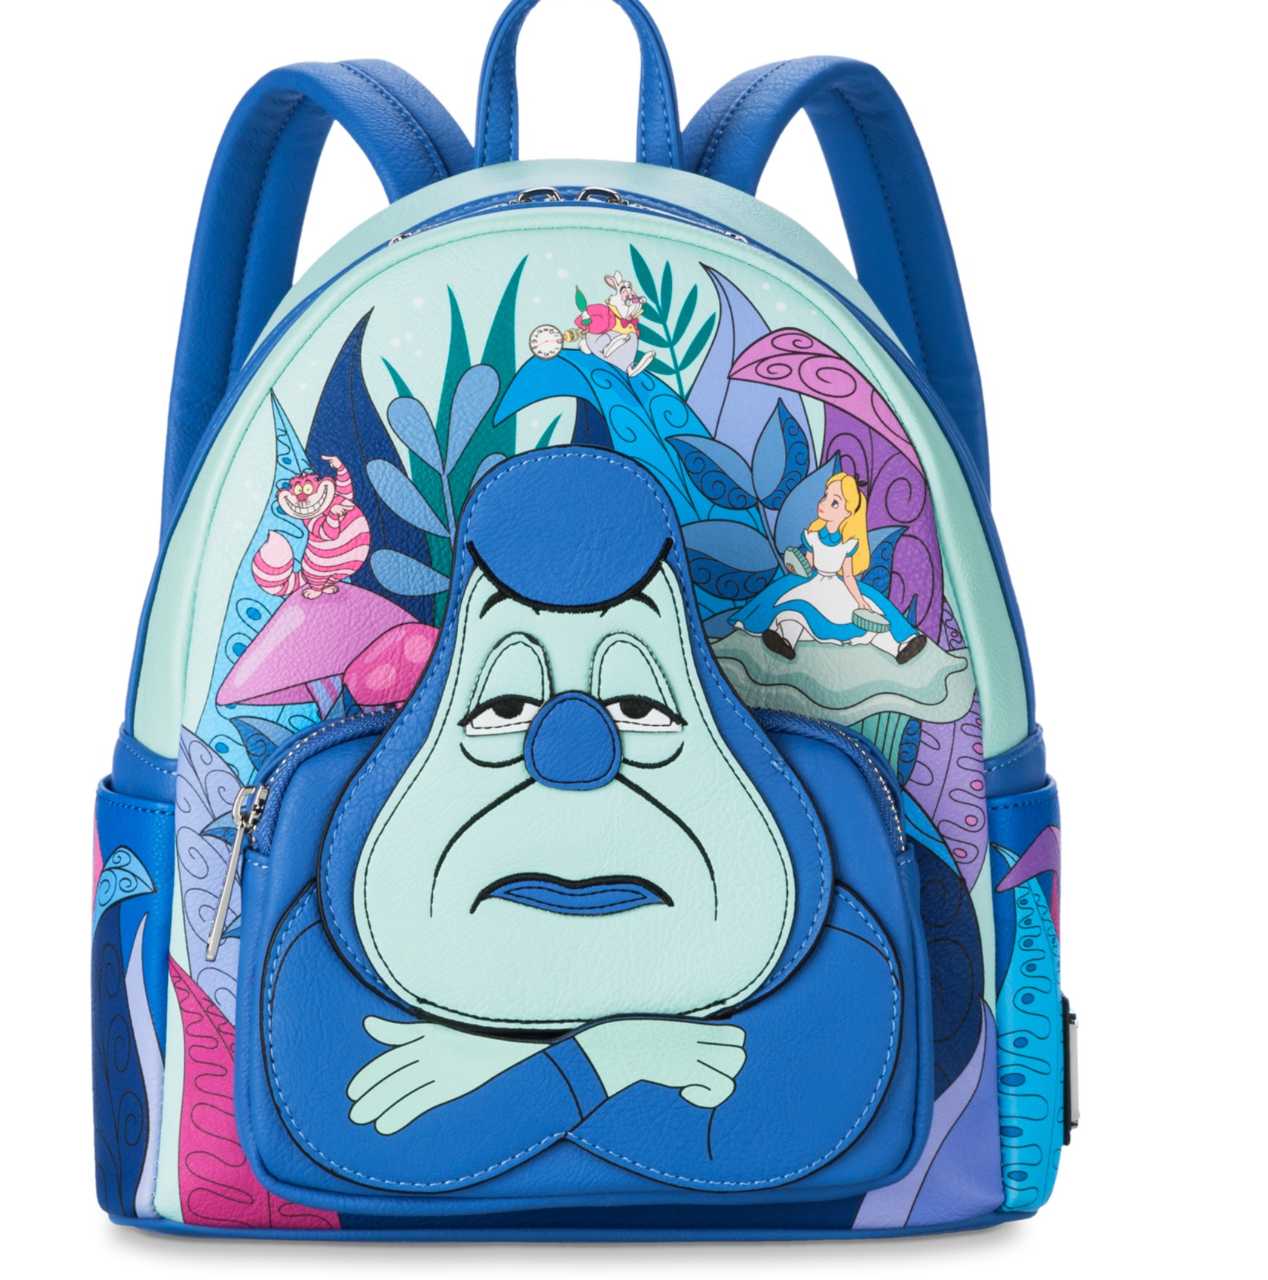 Disney Alice in Wonderland Loungefly Mini Backpack New With Tags